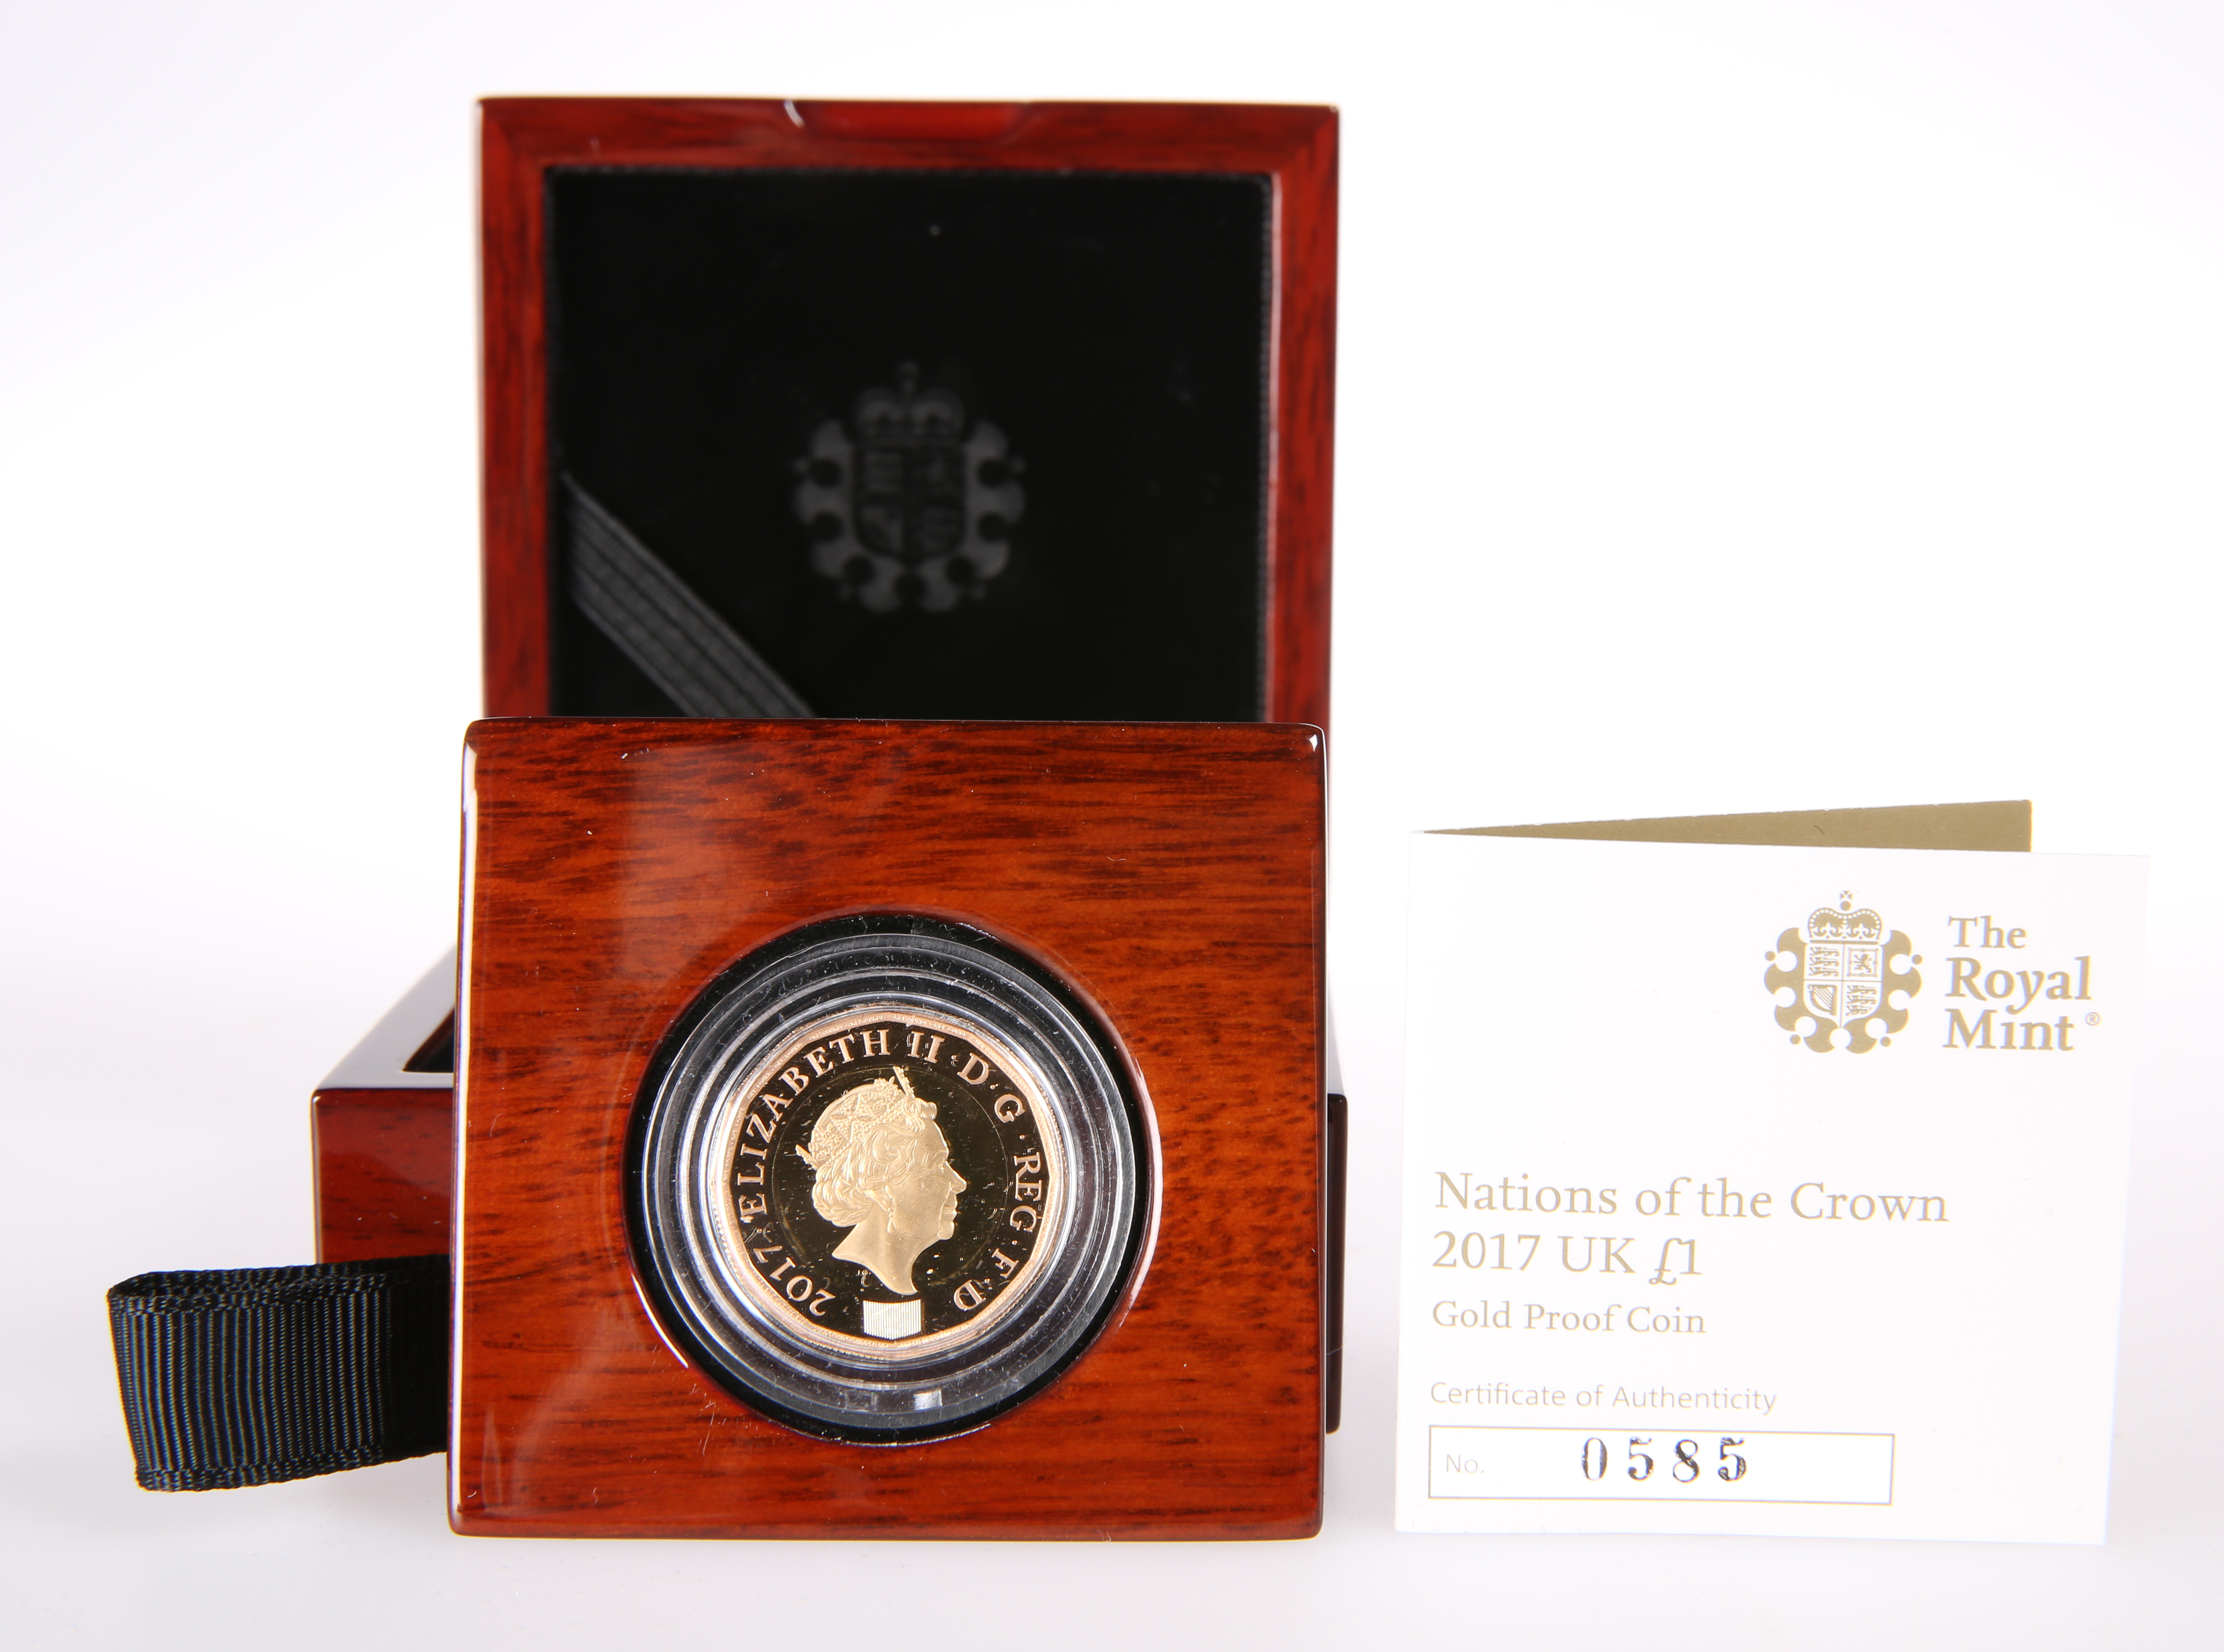 A ROYAL MINT "NATIONS OF THE CROWN" 2017 PROOF ONE POUND COIN, no. 0585, boxed with certificate.